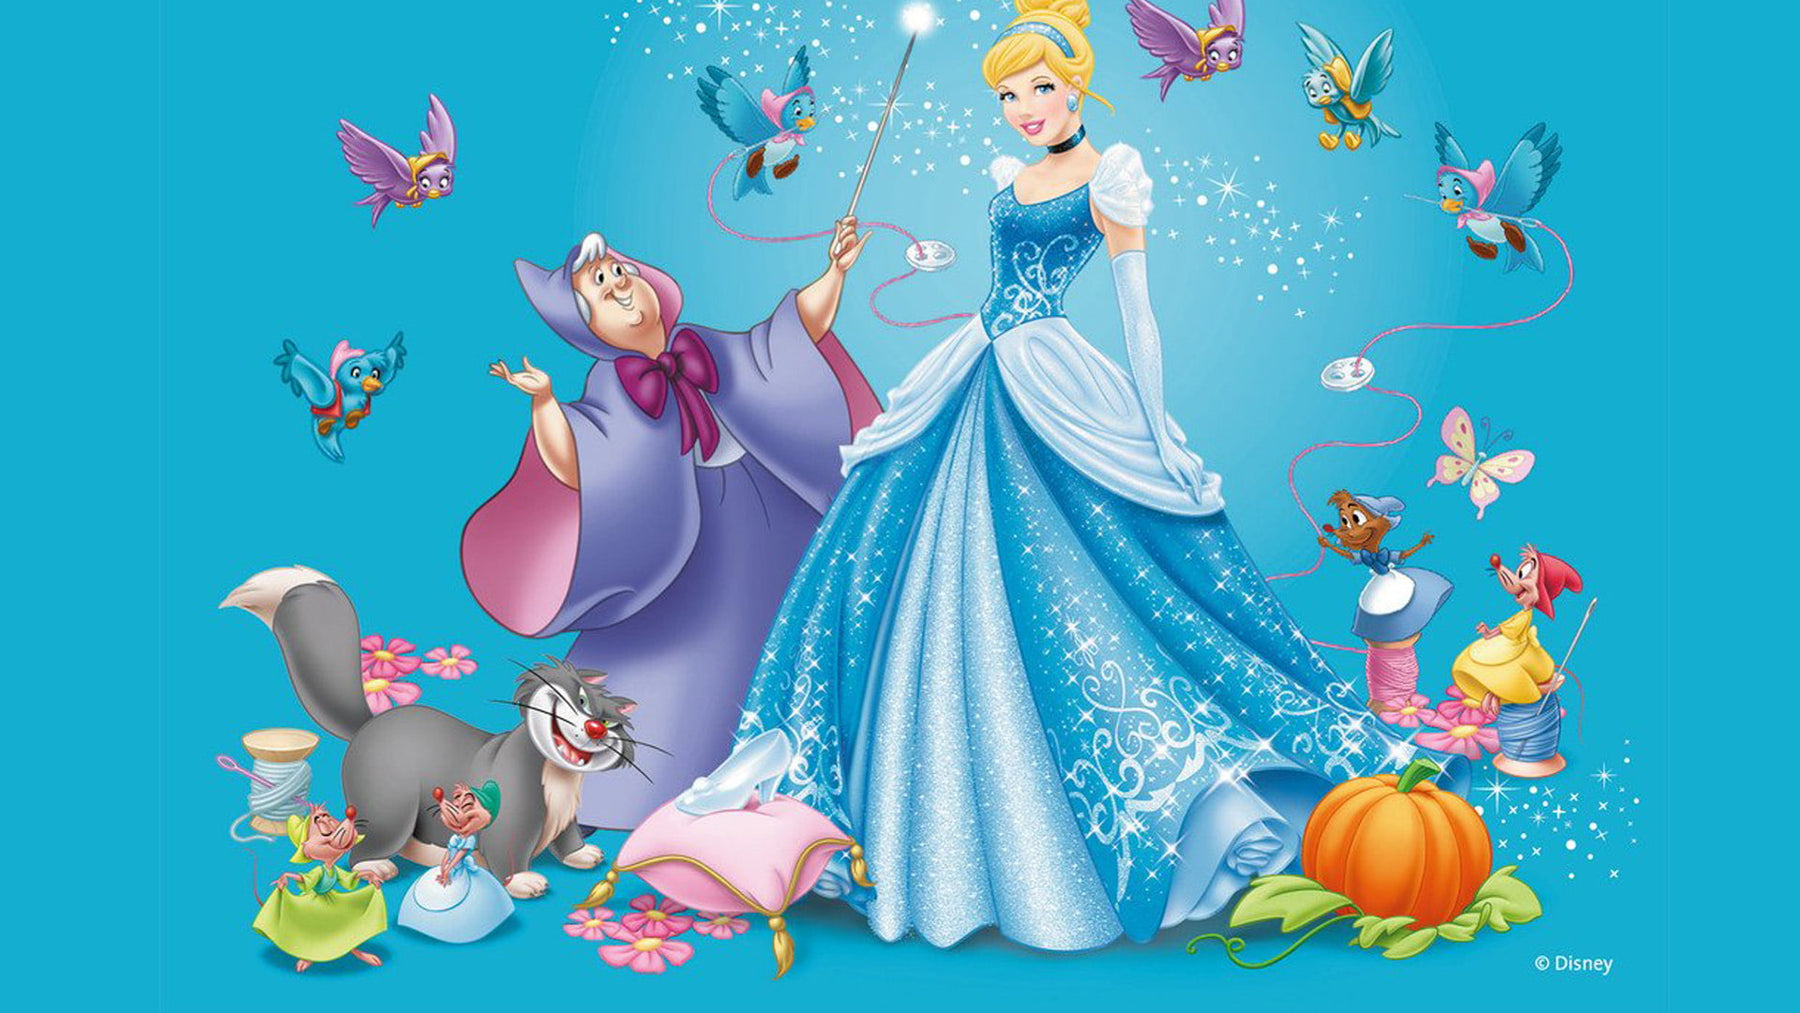 Cinderella: A Story of Kindness and Hope